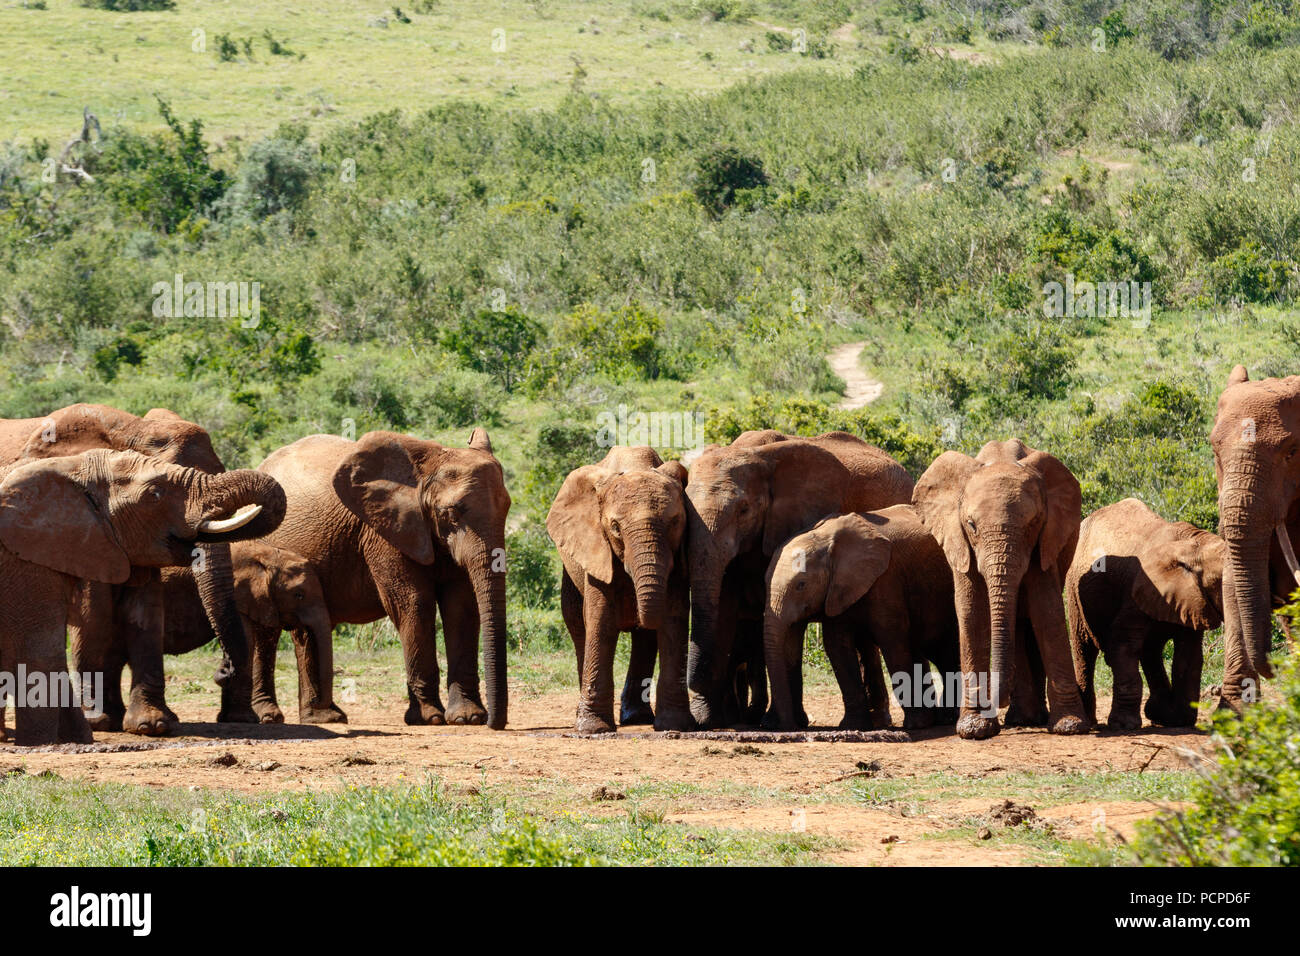 Elephant family standing together at the watering hole Stock Photo